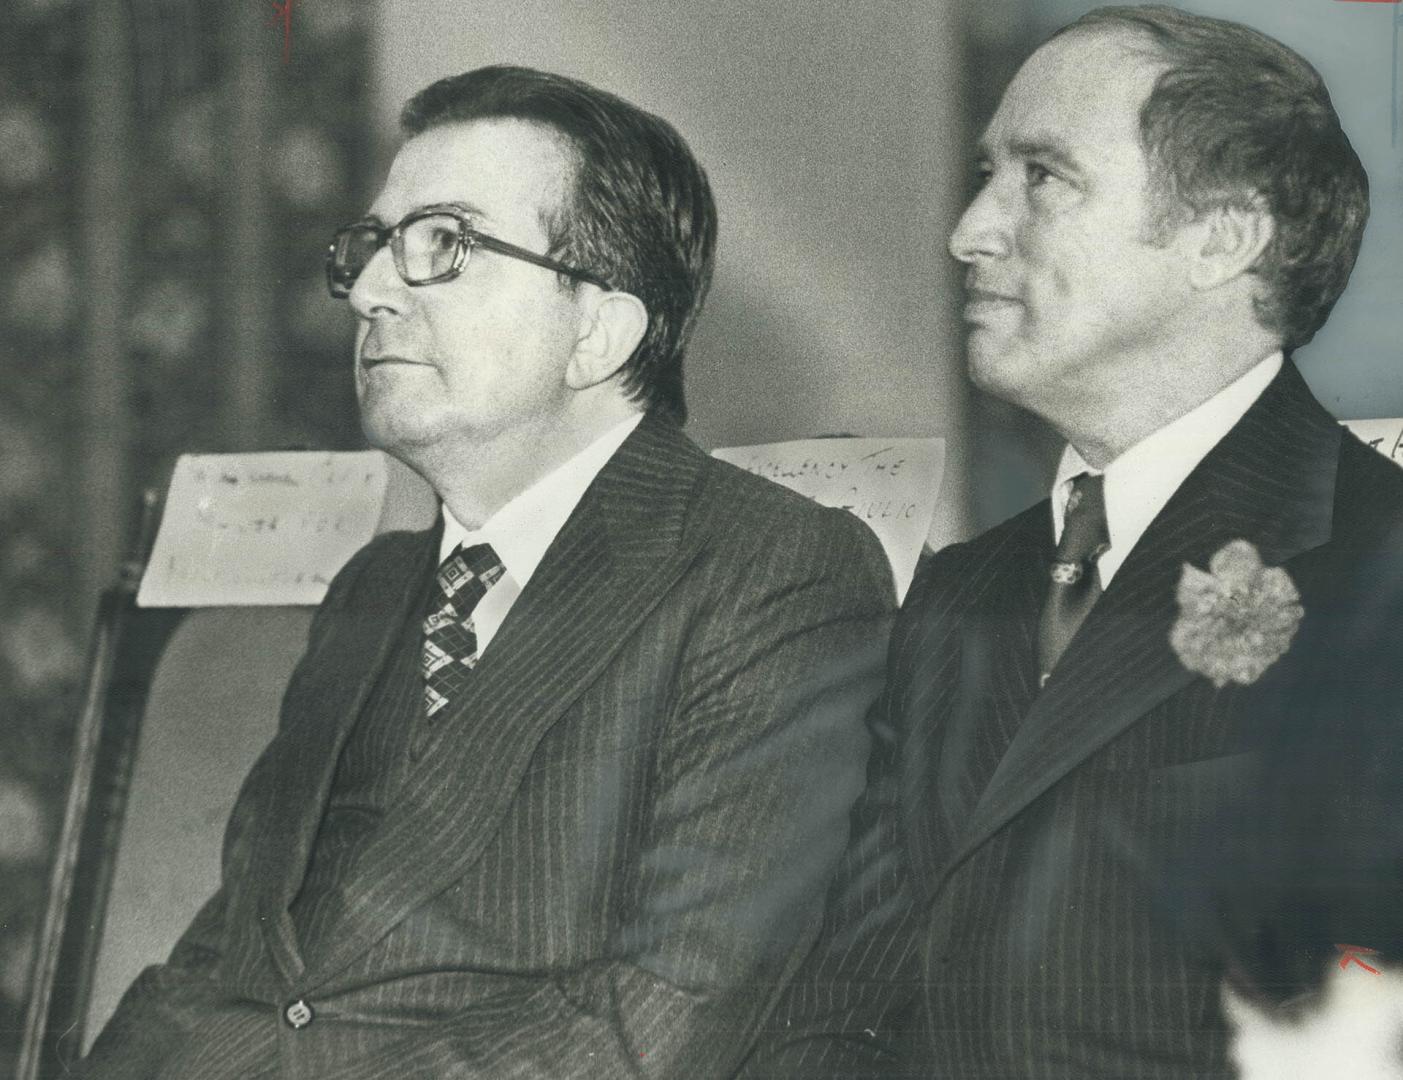 Two Prime Ministers later joined more than 2,000 people in a nearby banquet hall where Andreotti (left) urged Italian Canadians to remain mindful of h(...)